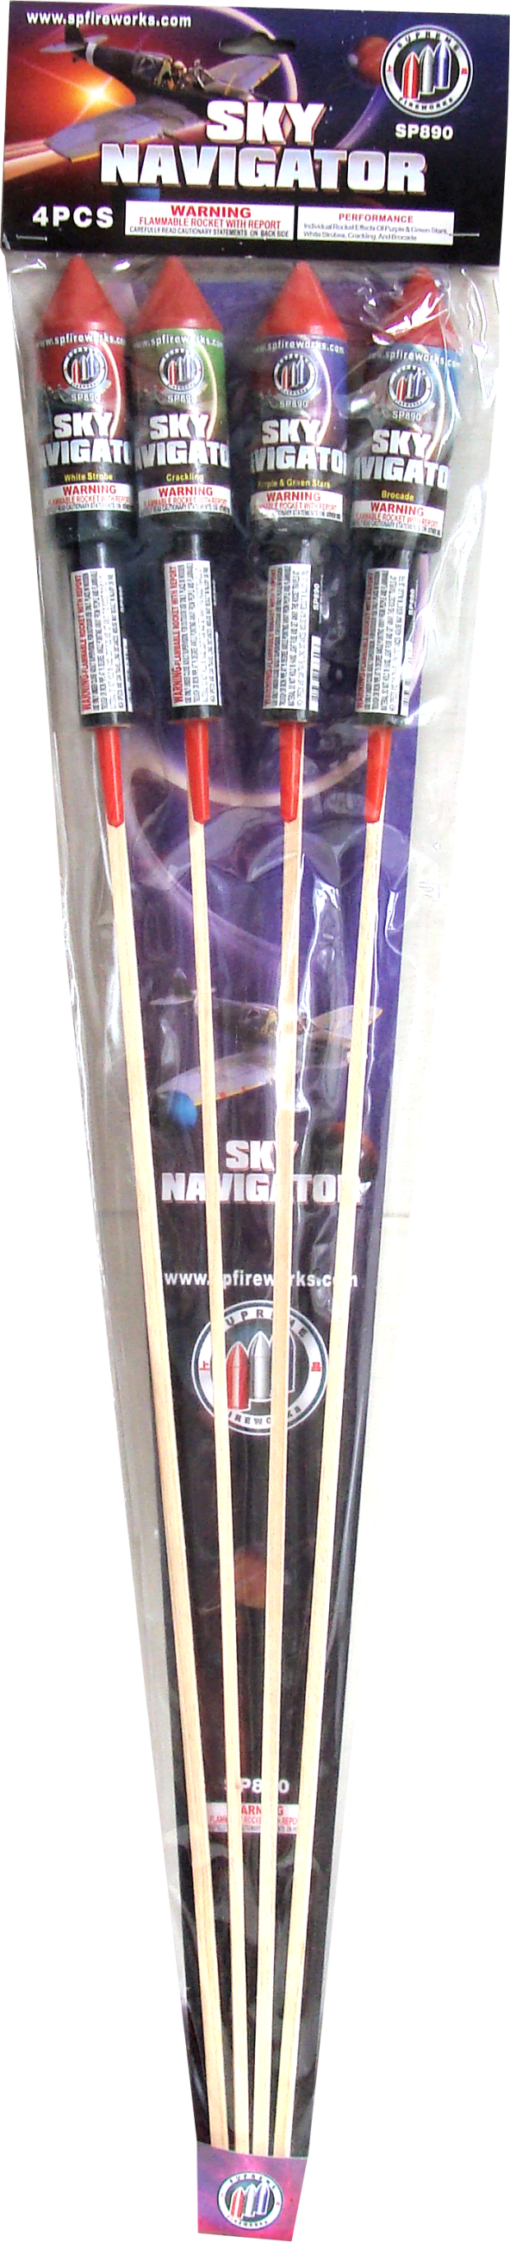 A package of four SKY NAVIGATOR wooden sticks in a package.